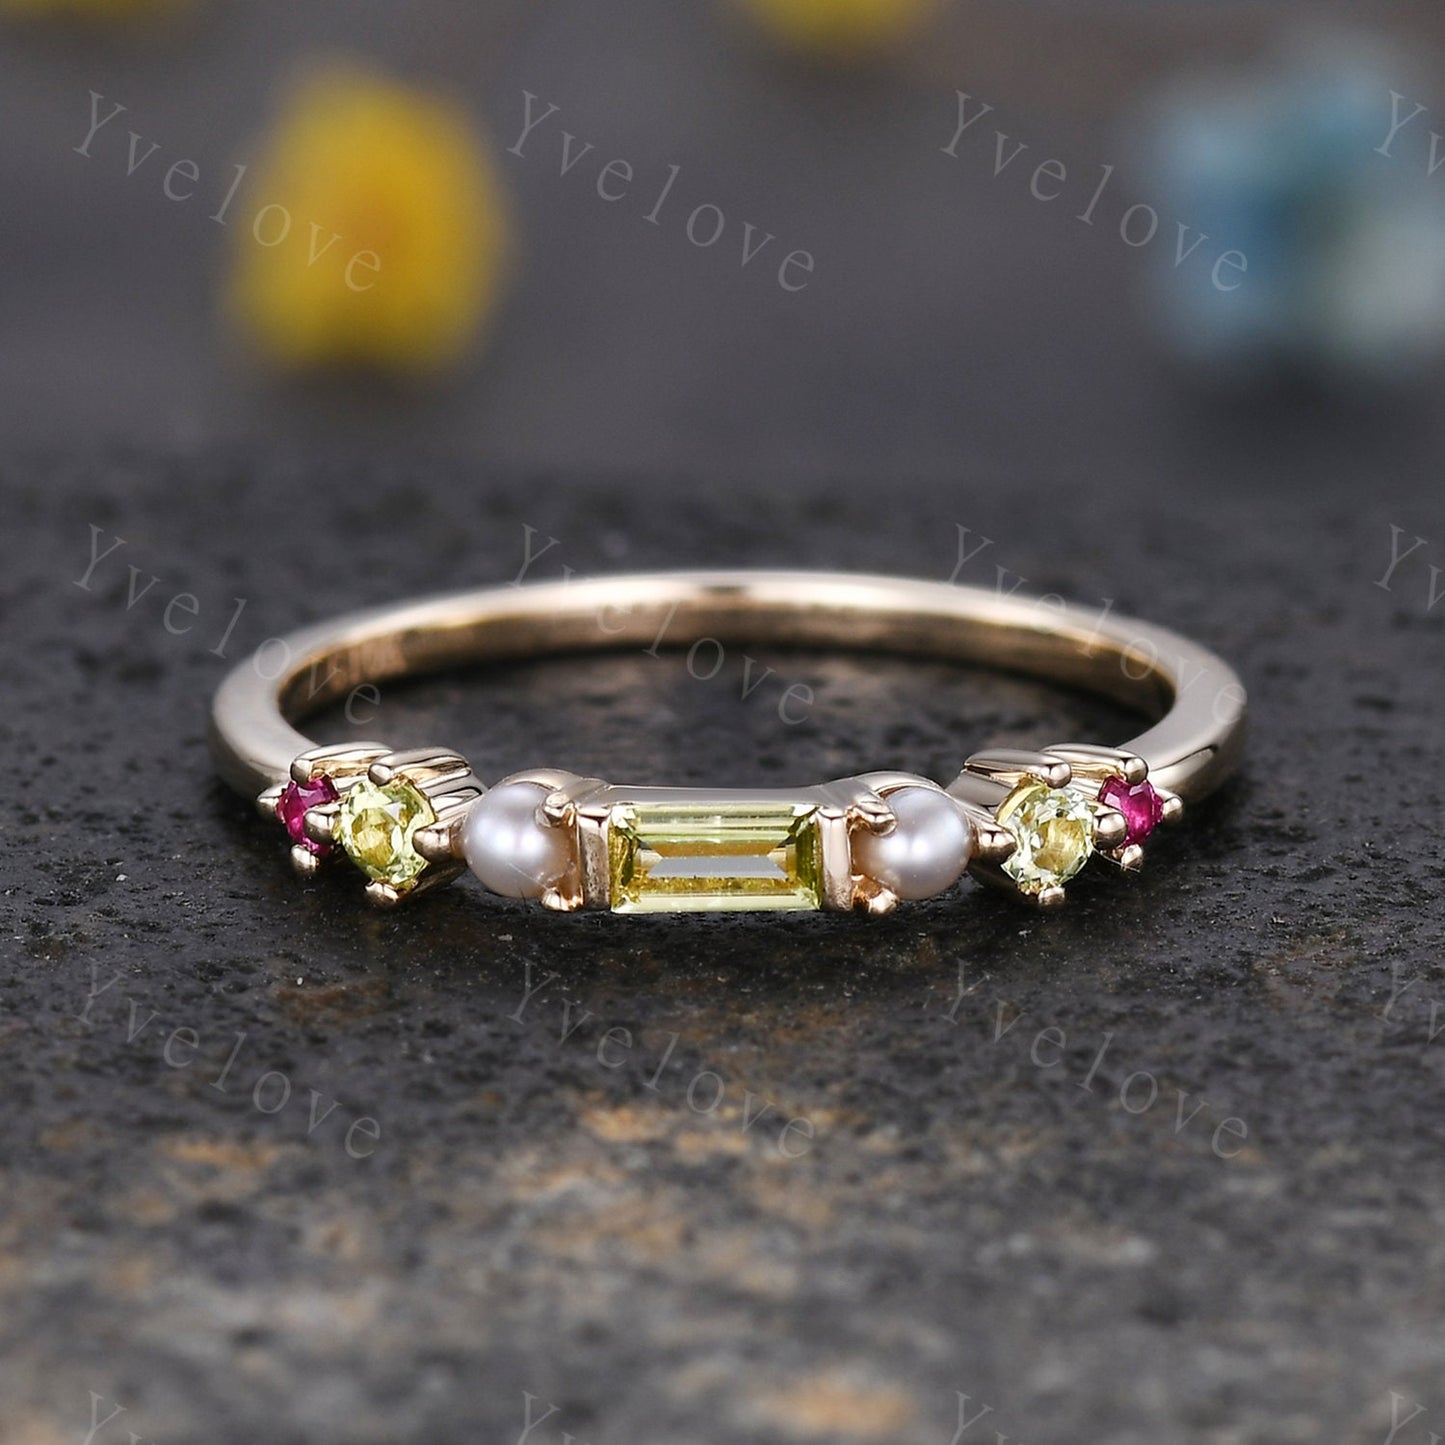 Minimalist Baguette shaped peridot band dainty pearl red garnet wedding band women stackable matching ring gold plated personalized gift